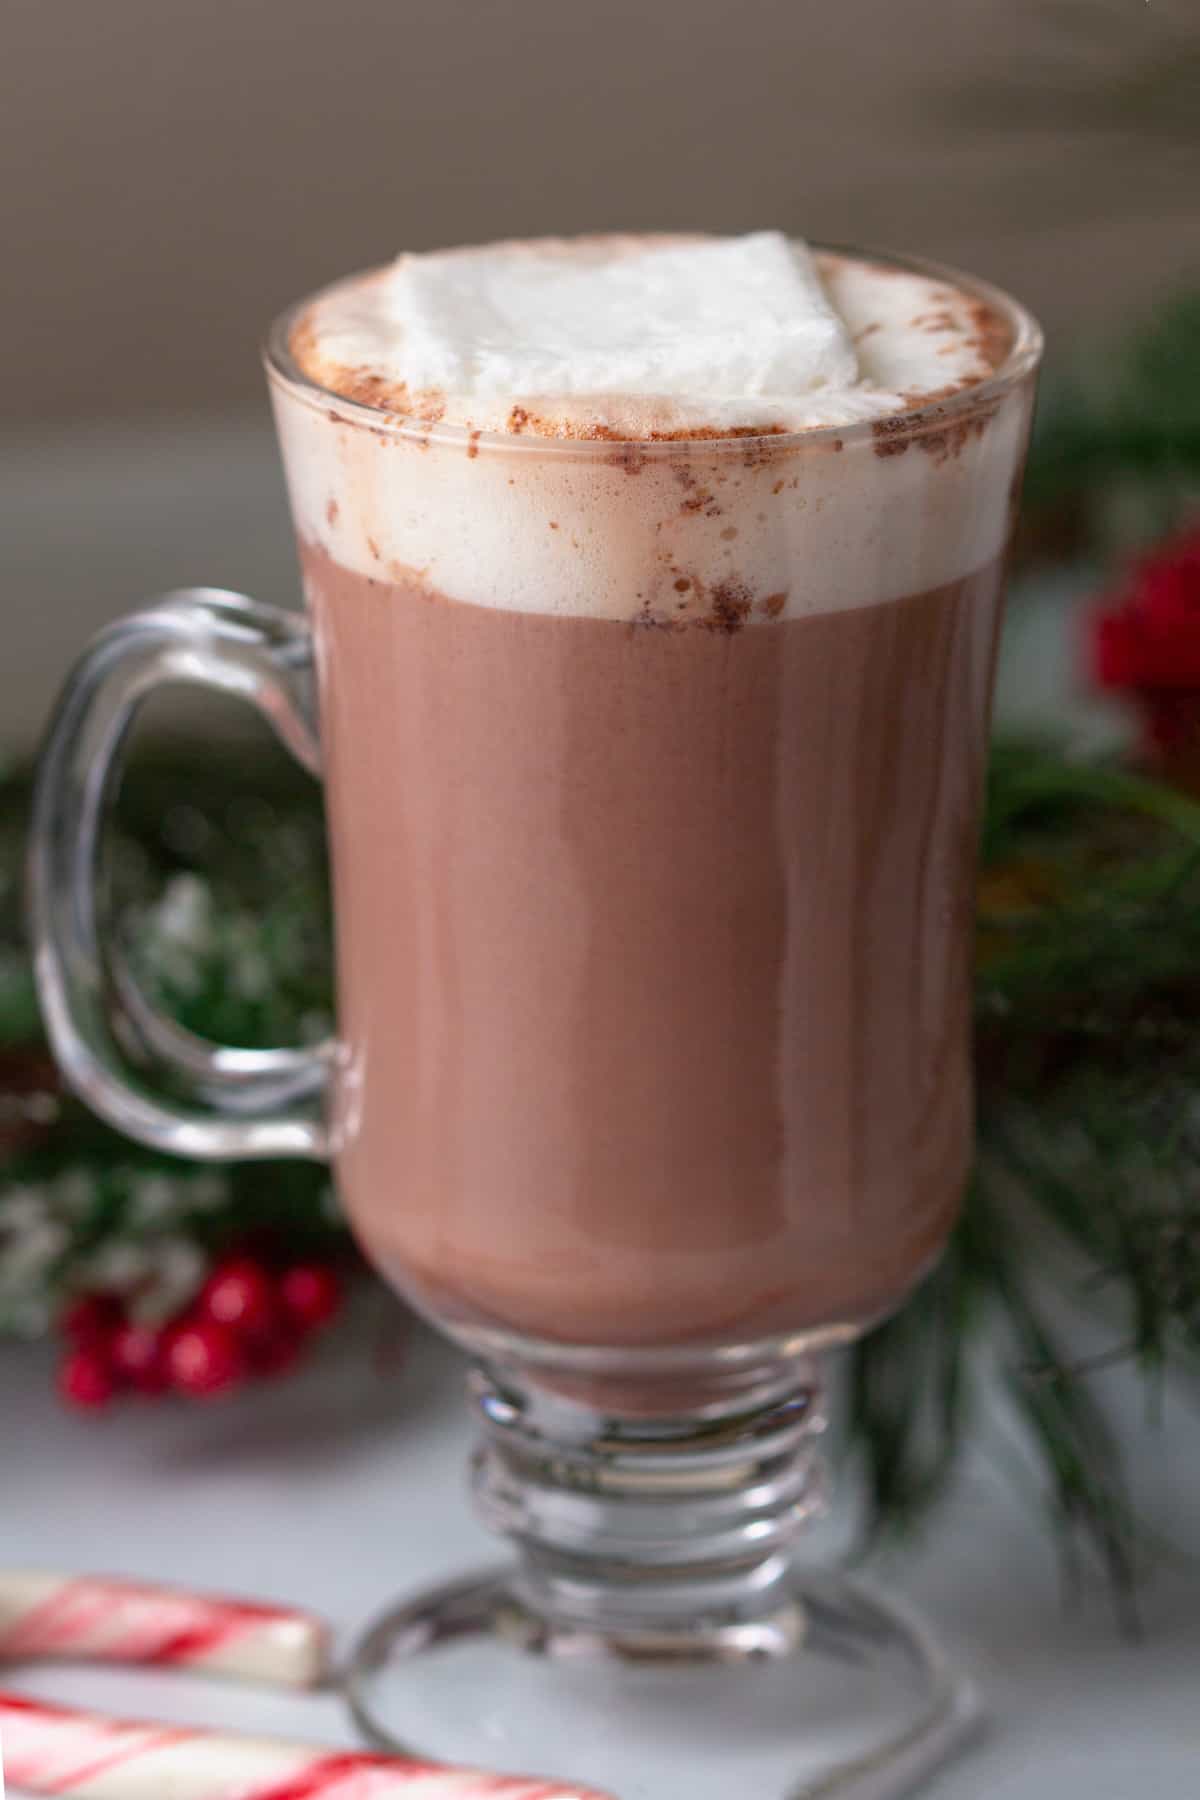 A cup of hot chocolate with whipped cream and candy canes.